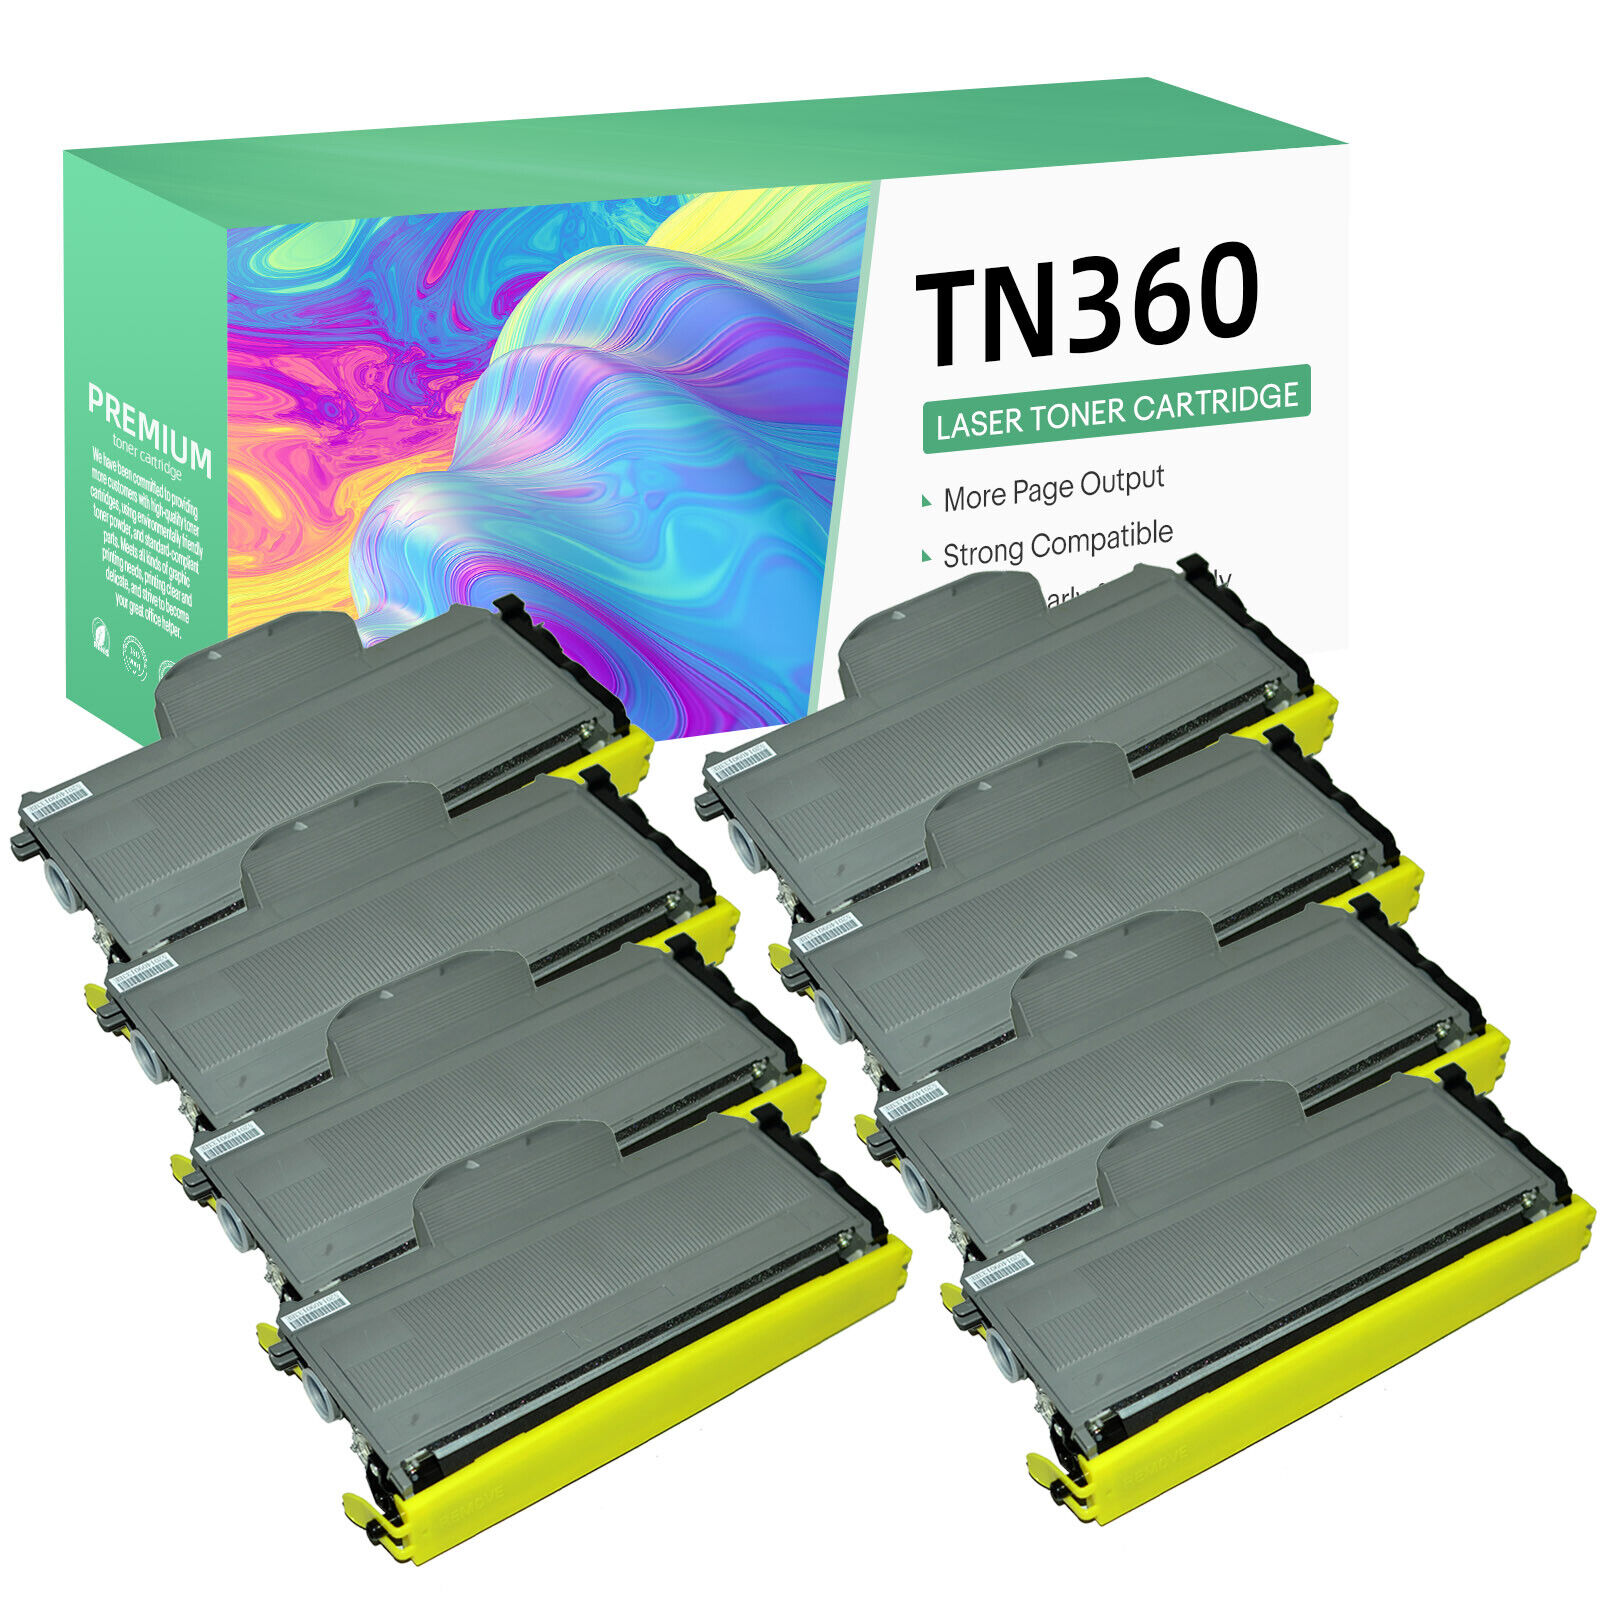 8Pack Replacement TN360 Toner Cartridges use with MFC-7320 DCP-7045N HL-2150N